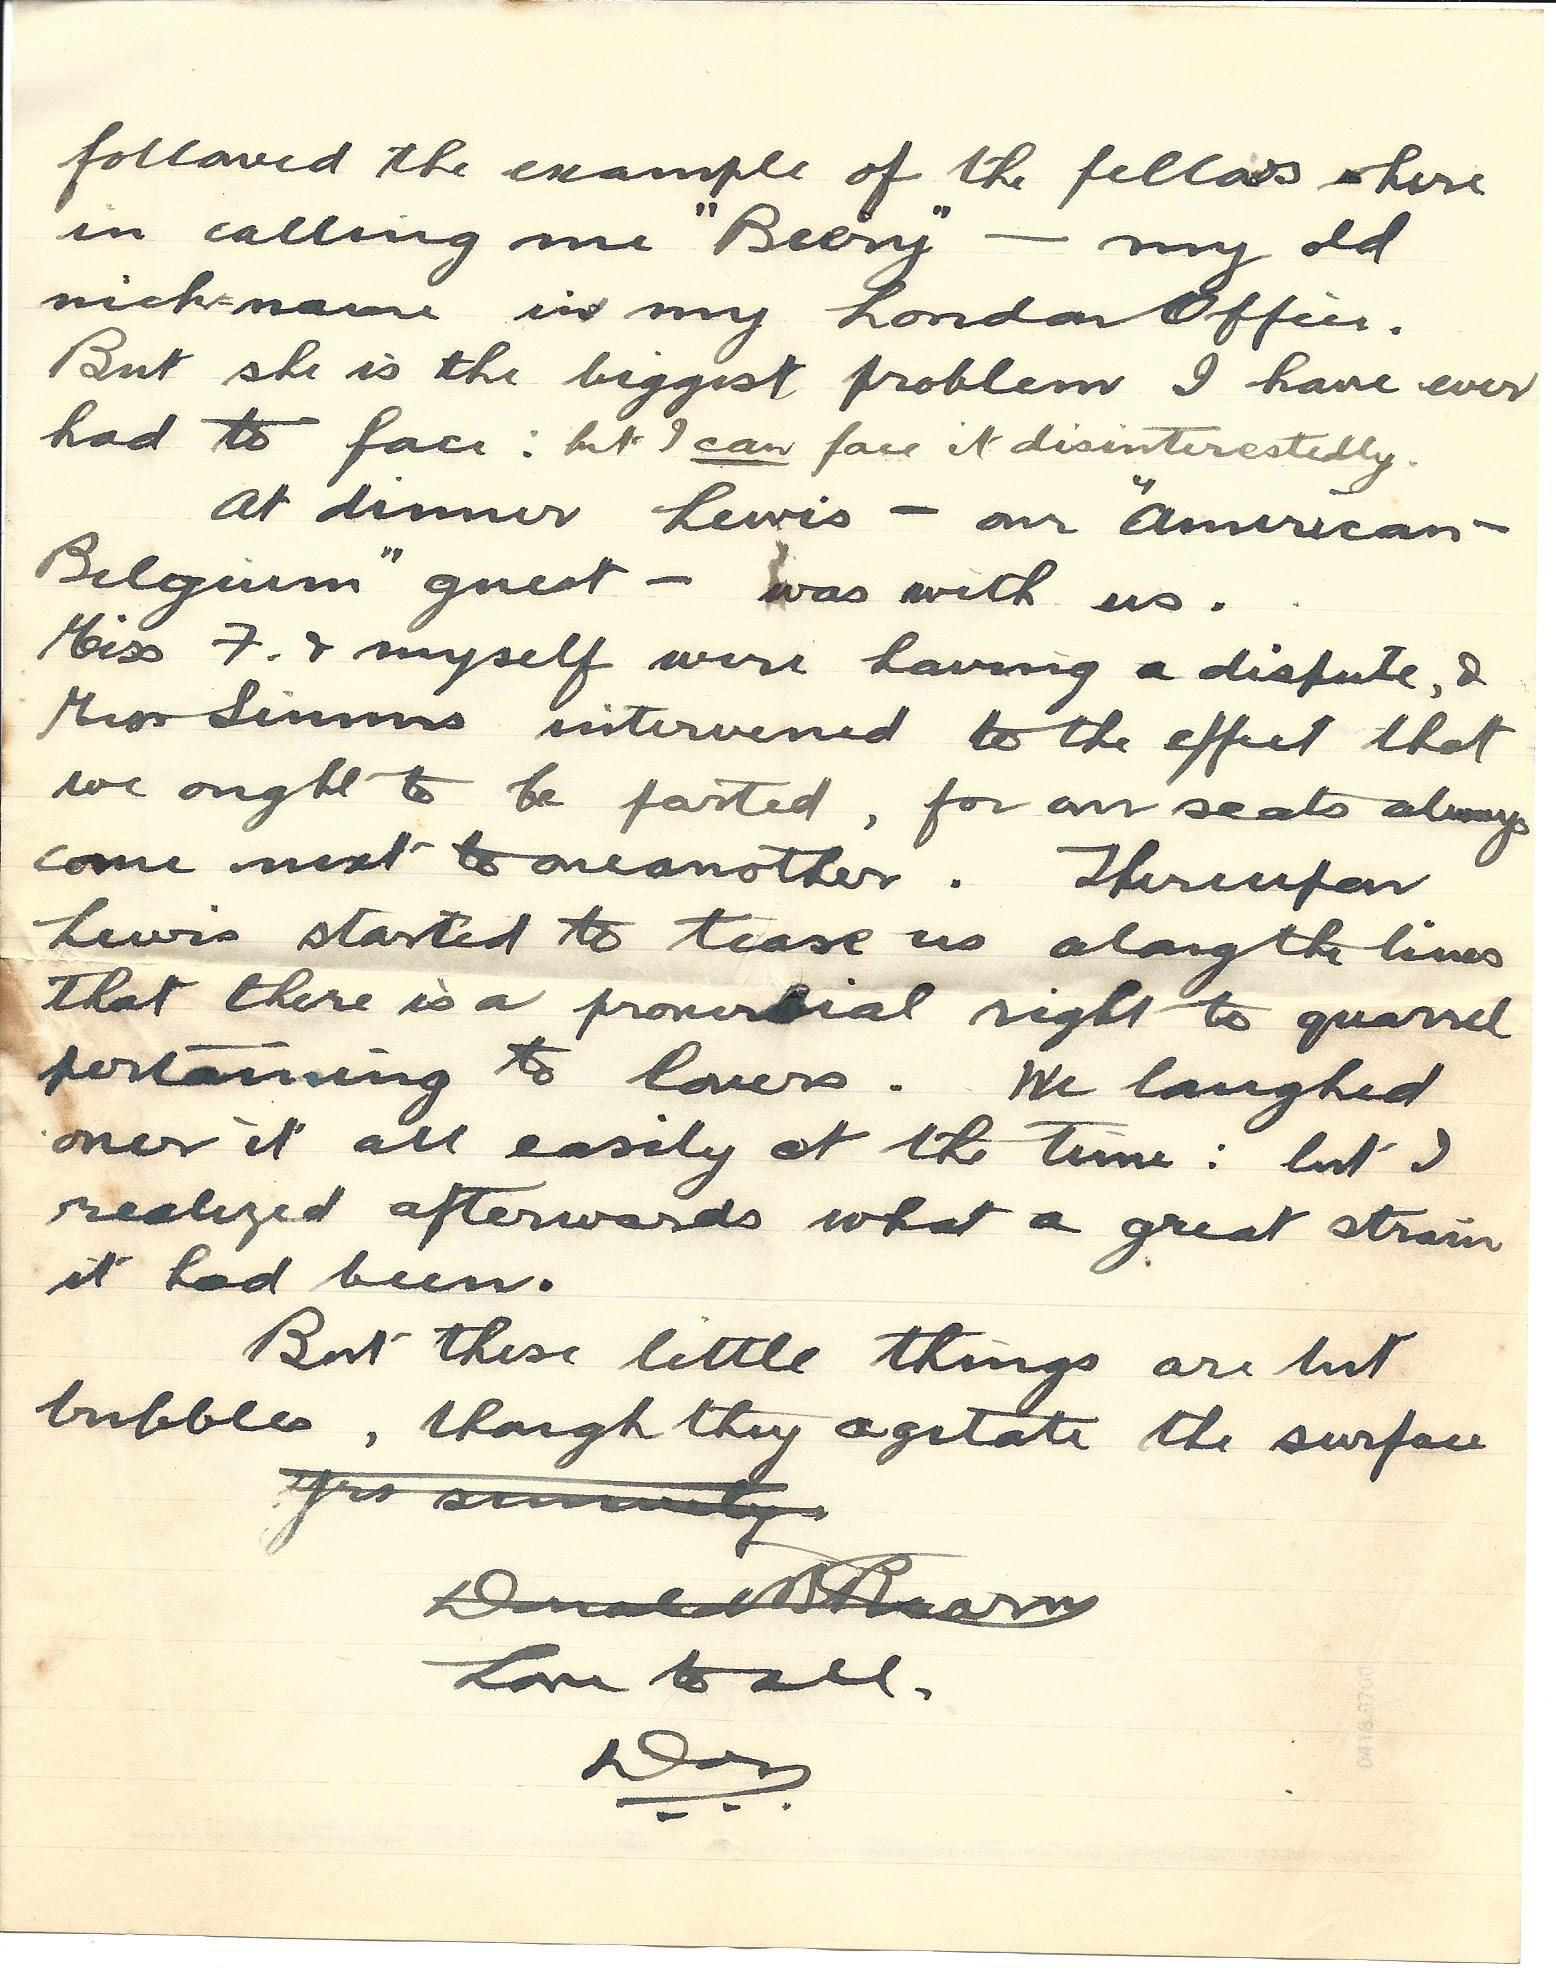 1919-09-26 Page 2 letter by Donald Bearman